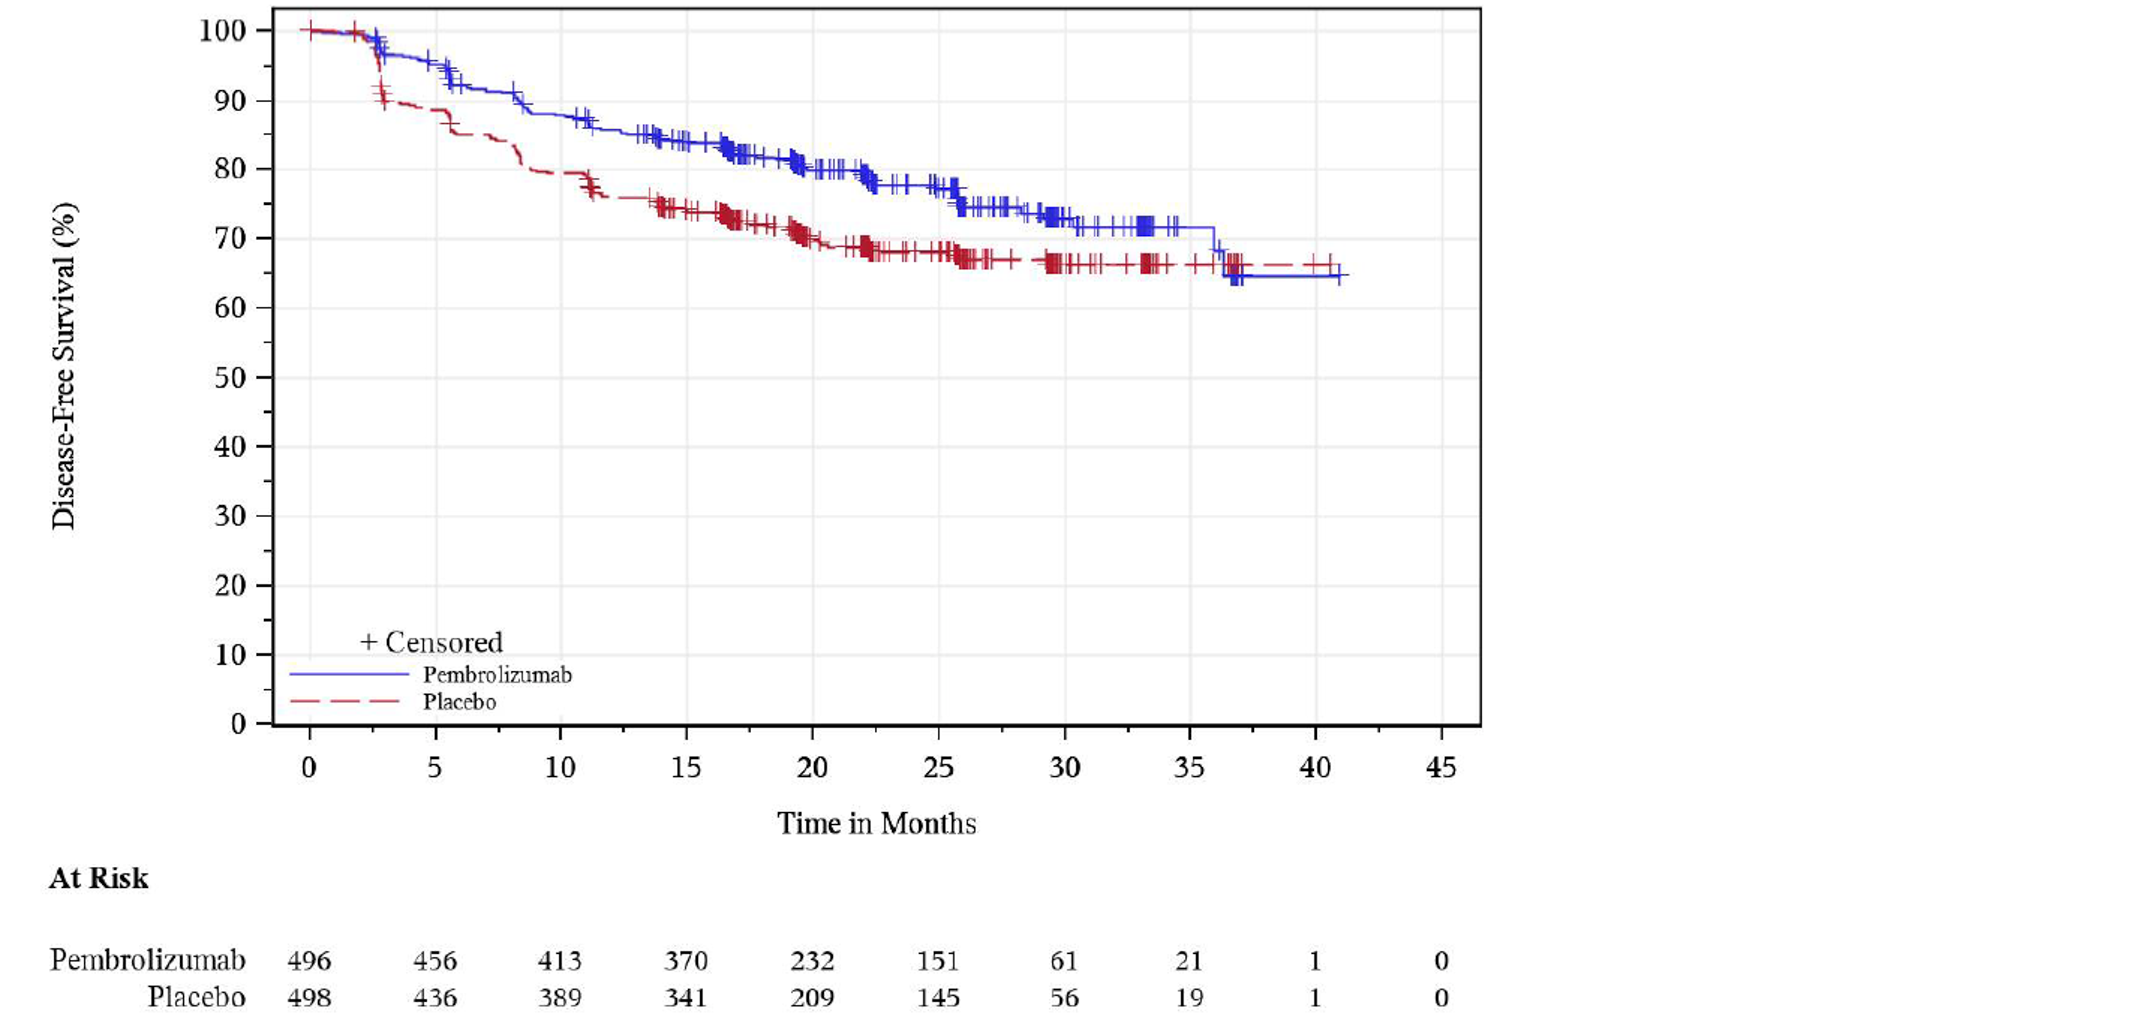 Kaplan-Meier analysis of disease-free survival for patients enrolled in the KEYNOTE-564 trial showing the number of at-risk patients receiving pembrolizumab at 0, 5, 10, 15, 20, 25, 30, 35, 40, and 45 months was 496, 456, 413, 370, 232, 151, 61, 21, 1, and 0, respectively. The number of at-risk patients receiving placebo at 0, 5, 10, 15, 20, 25, 30, 35, 40, and 45 months was 498, 436, 389, 341, 209, 145, 56, 19, 1, and 0, respectively.